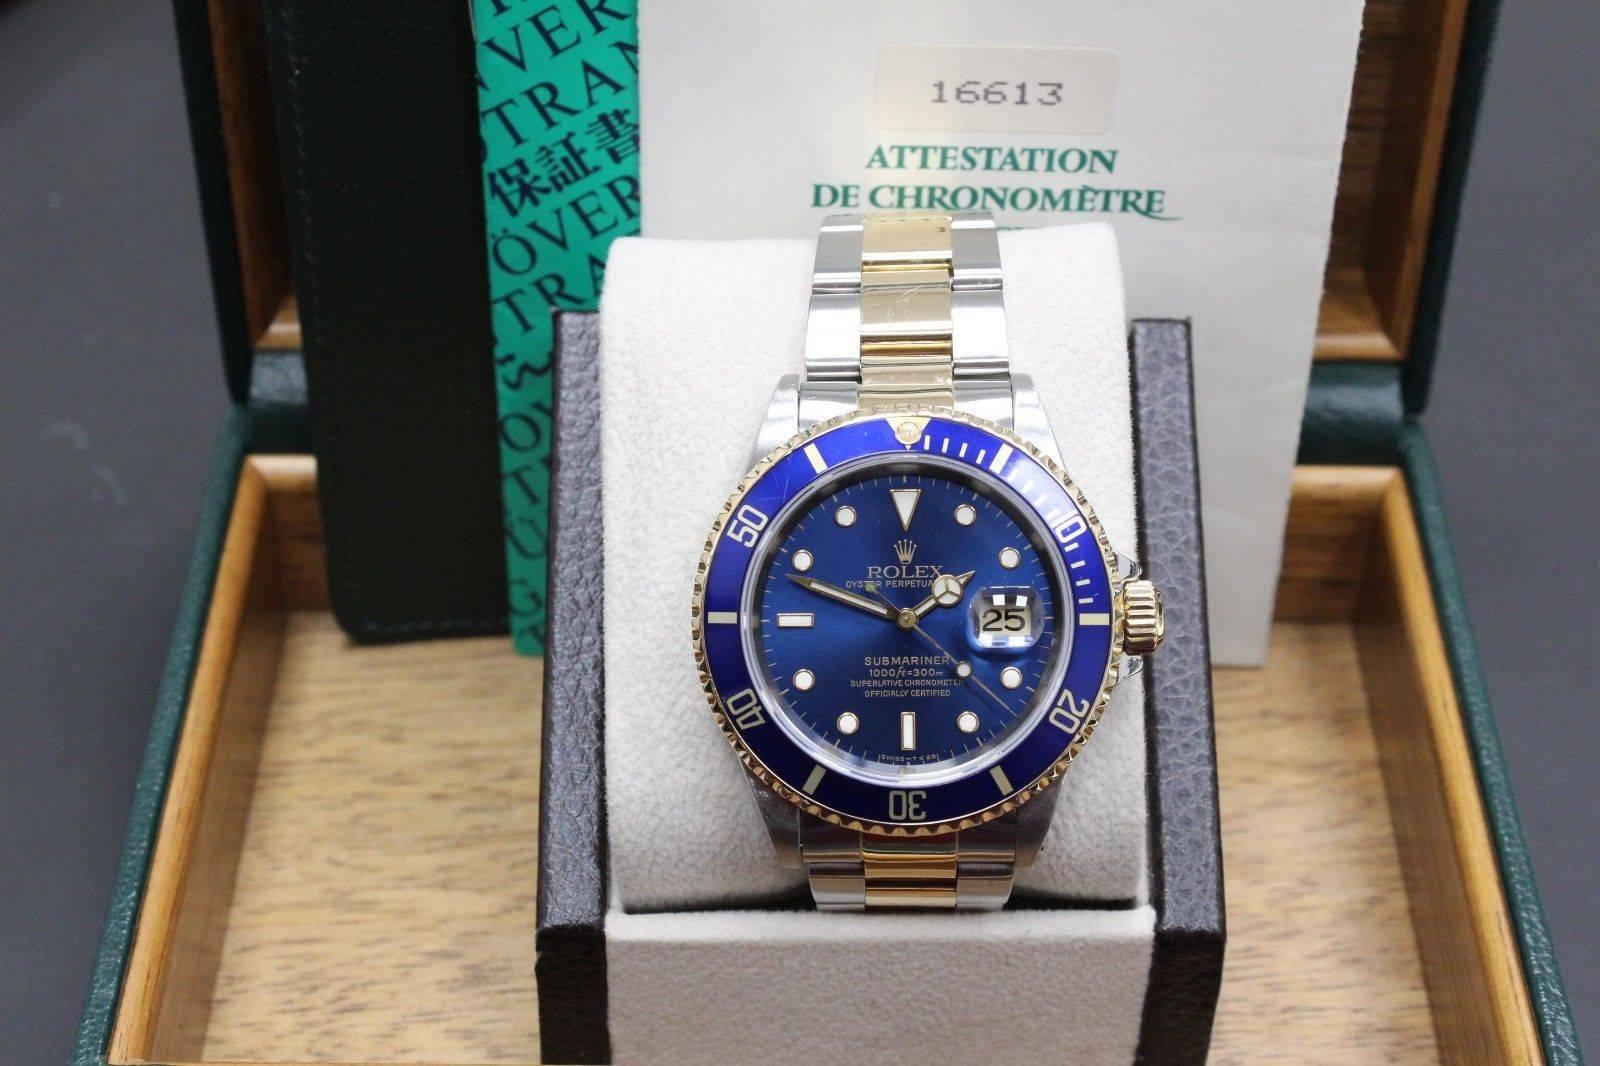 Style Number: 16613
Serial: W896***
Model: Submariner
Case: Stainless Steel 
Band: 18K Yellow Gold & Stainless Steel
Bezel: Blue
Dial: Blue
Face: Sapphire Crystal 
Case Size: 40mm 
Movement: Automatic
Includes: 
-Original Rolex Box &